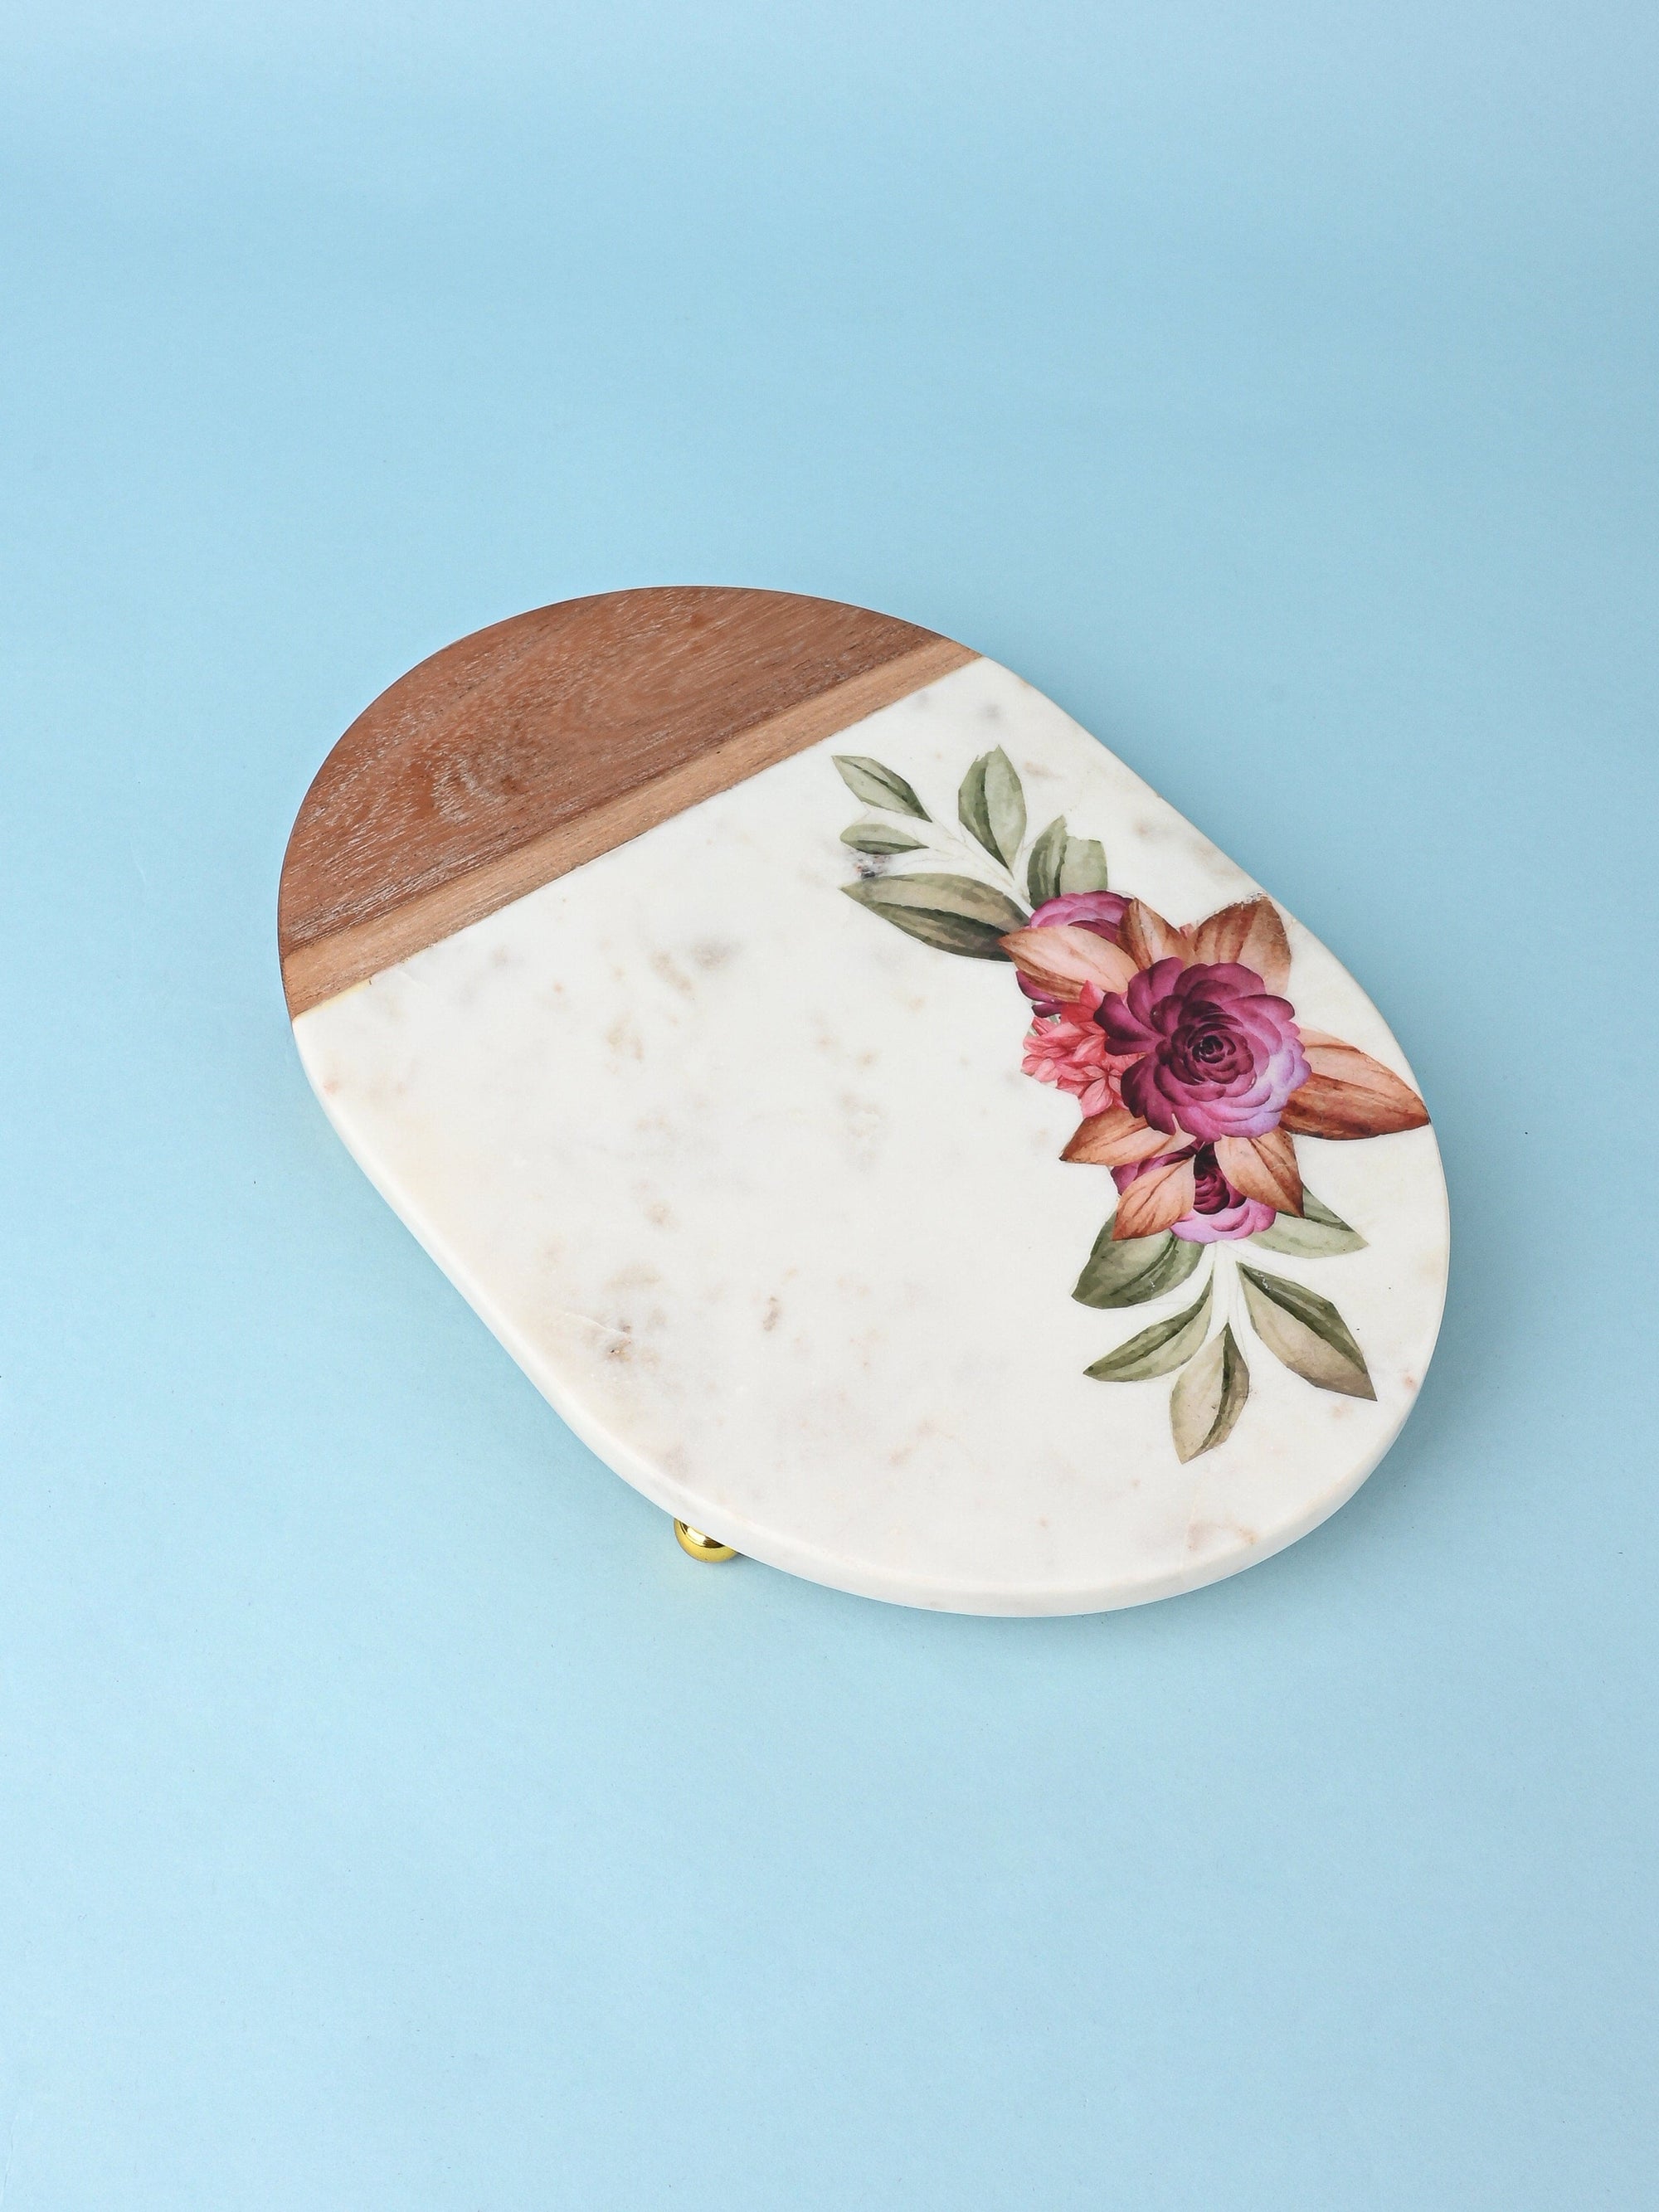 Printed Serving Tray Made of Marble and Wood with Stylish Metal Legs